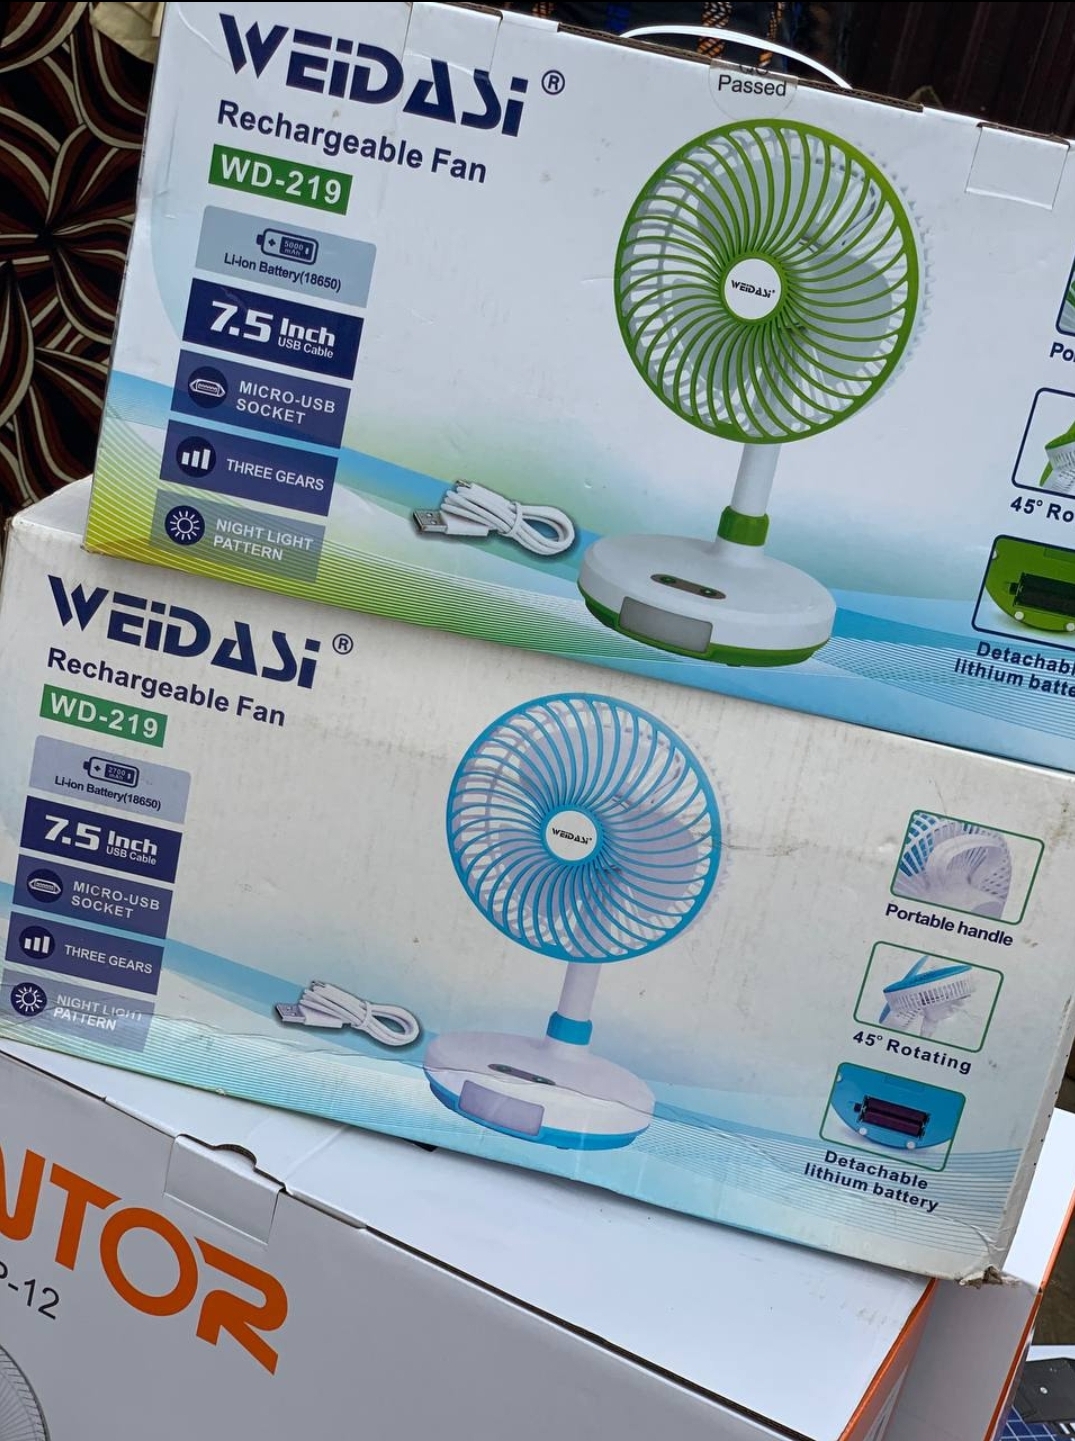 Wd-219 Weidasi 7.5Inches Rechargeable Table Fan